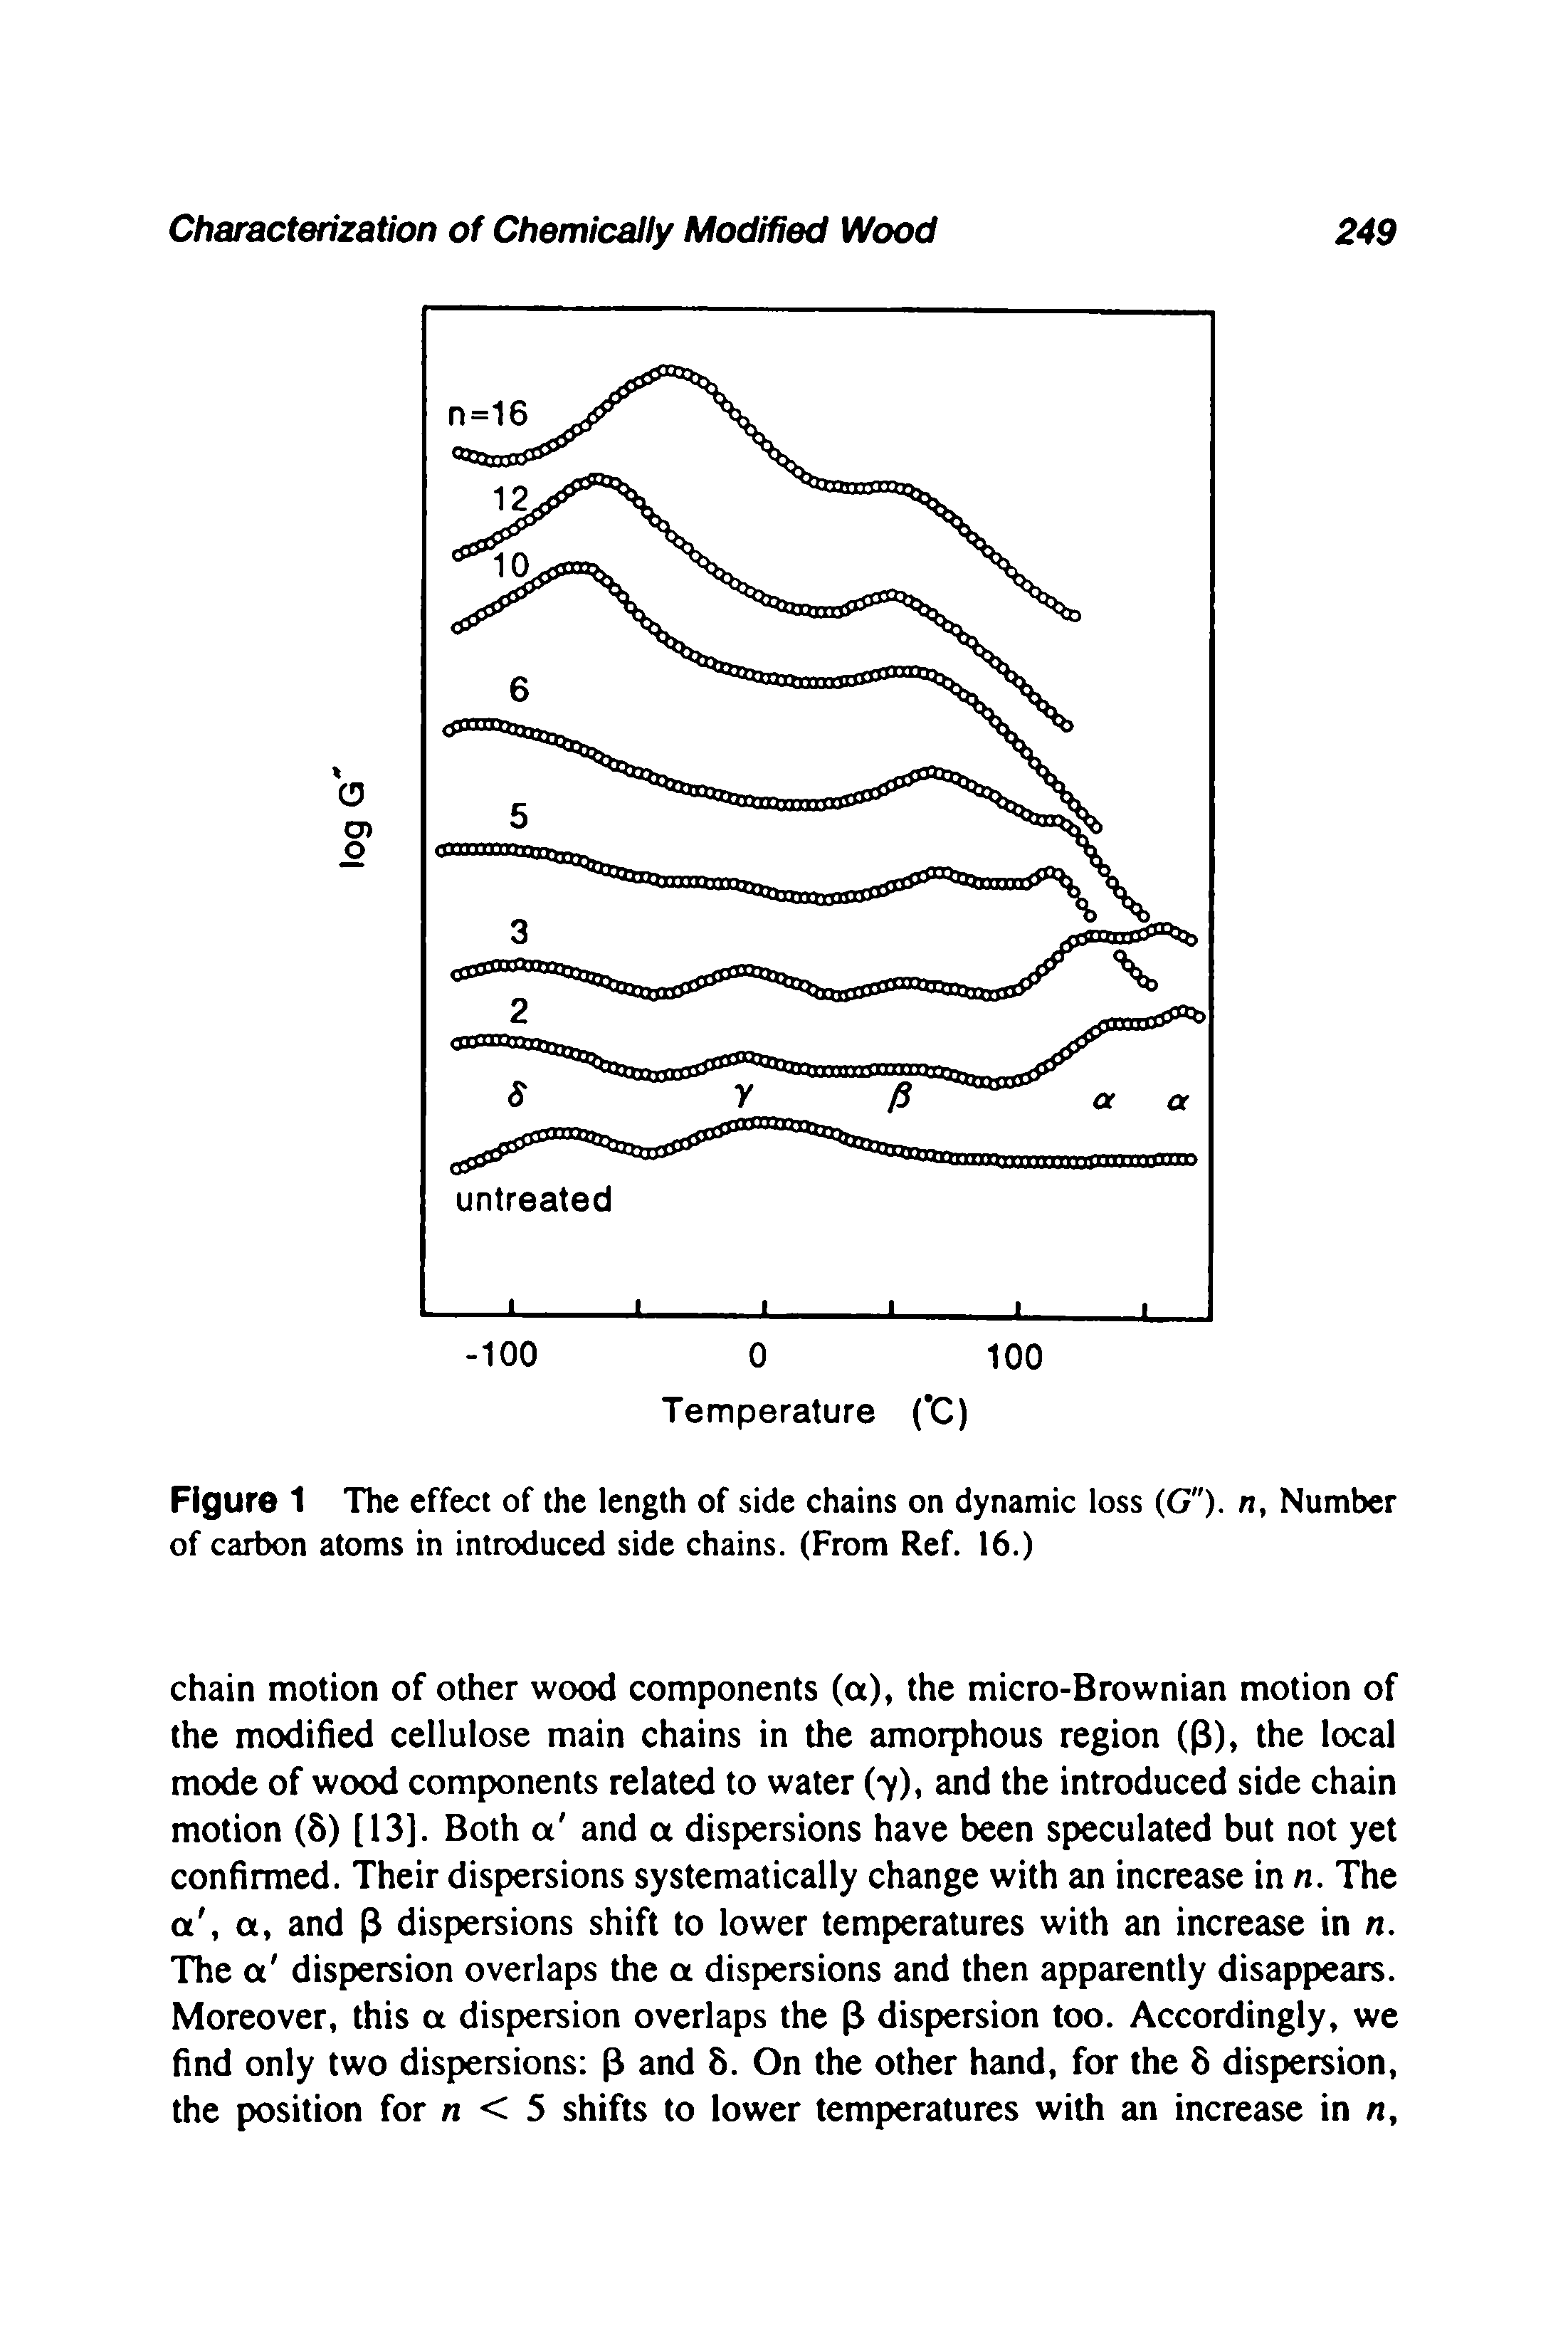 Figure 1 The effect of the length of side chains on dynamic loss (G"). n, Number of carbon atoms in introduced side chains. (From Ref. 16.)...